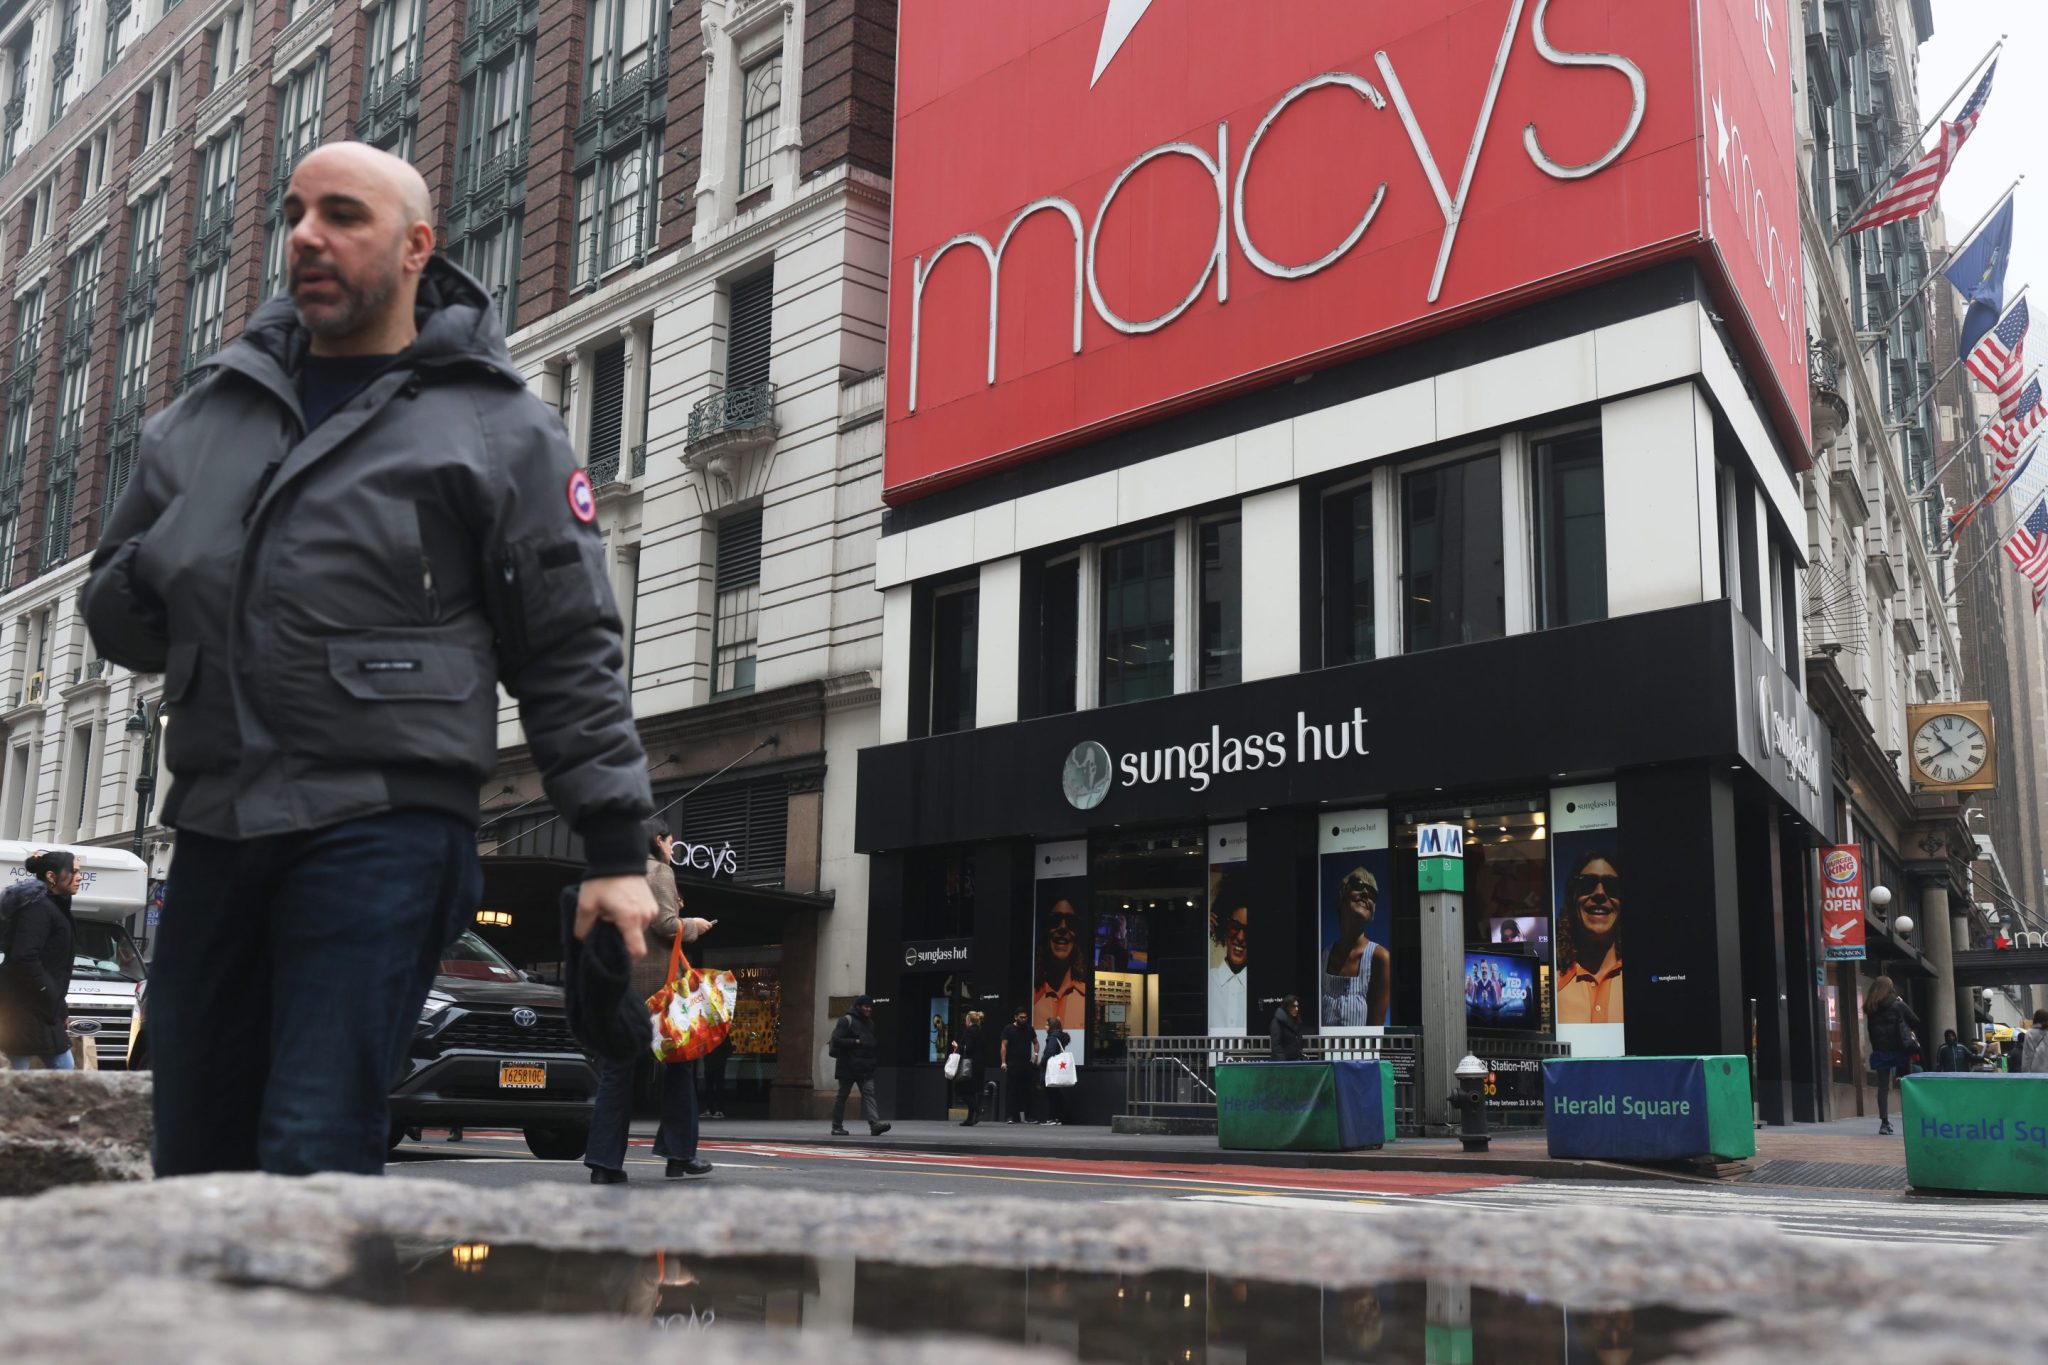 Macy’s gets $5.8 billion buyout offer from investor group